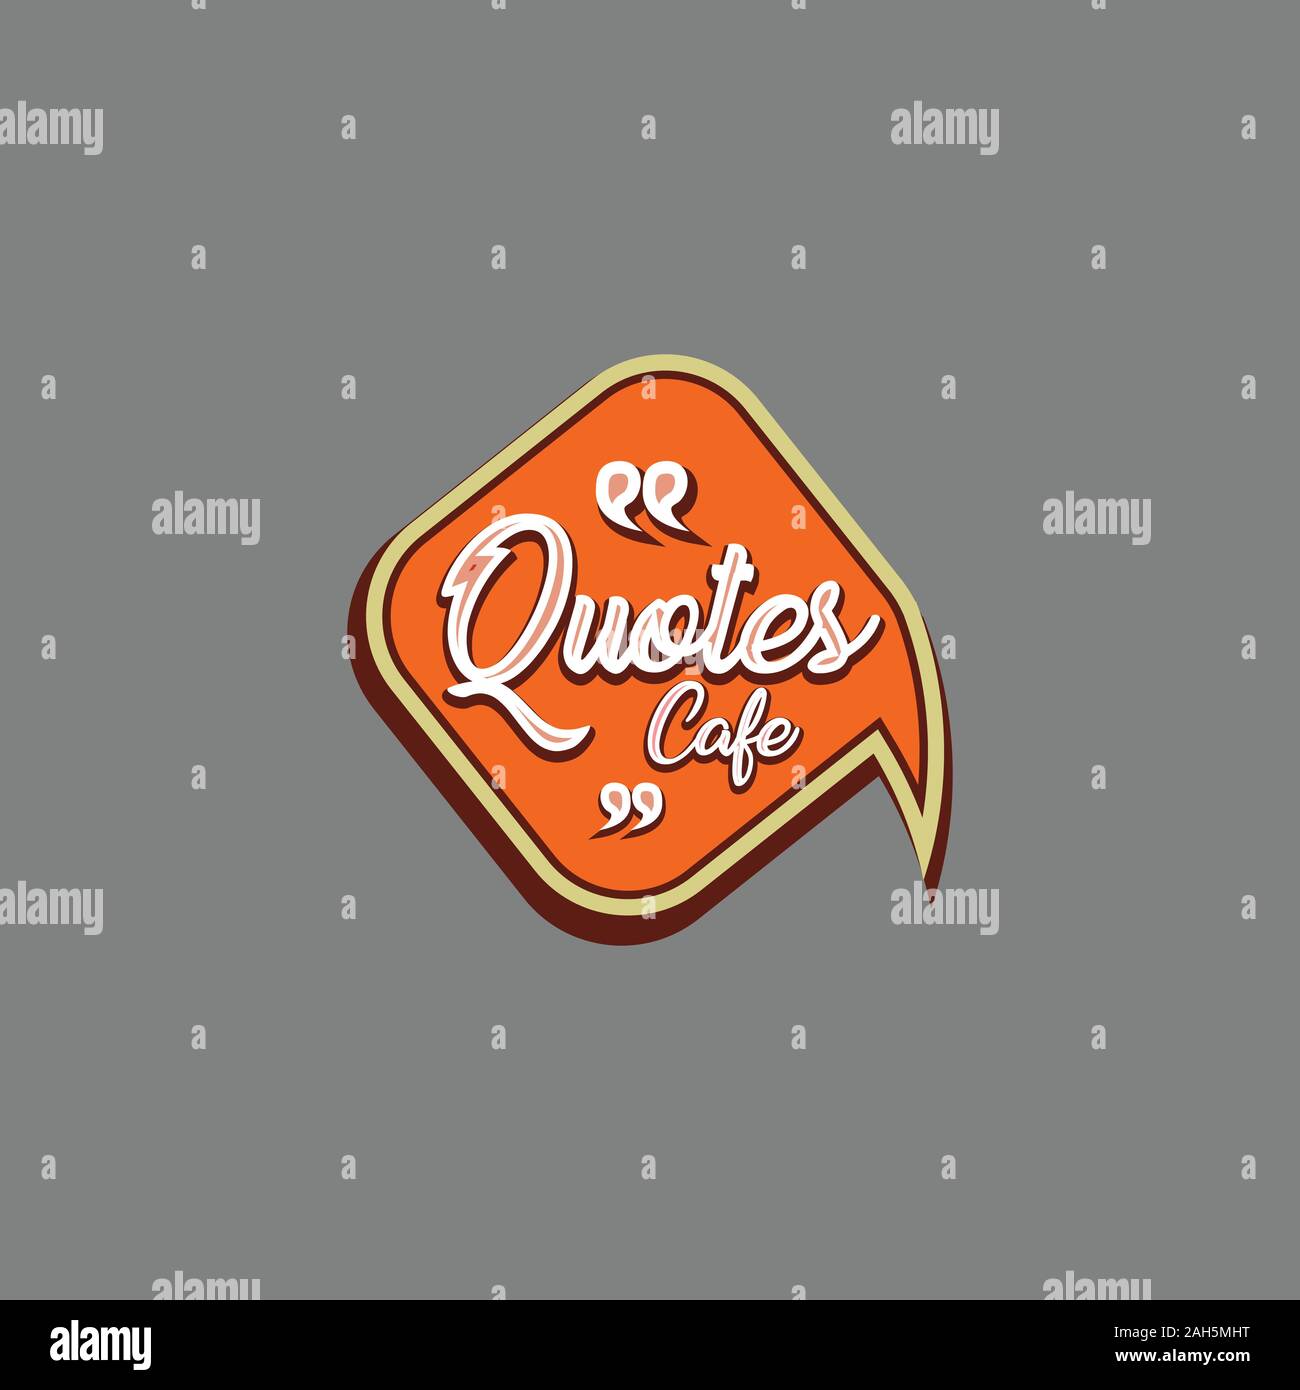 Quotes Cafe Logo Design Template, Call Out Logo Concept, Orange, Beige, Brown, White , Gray Background Stock Vector